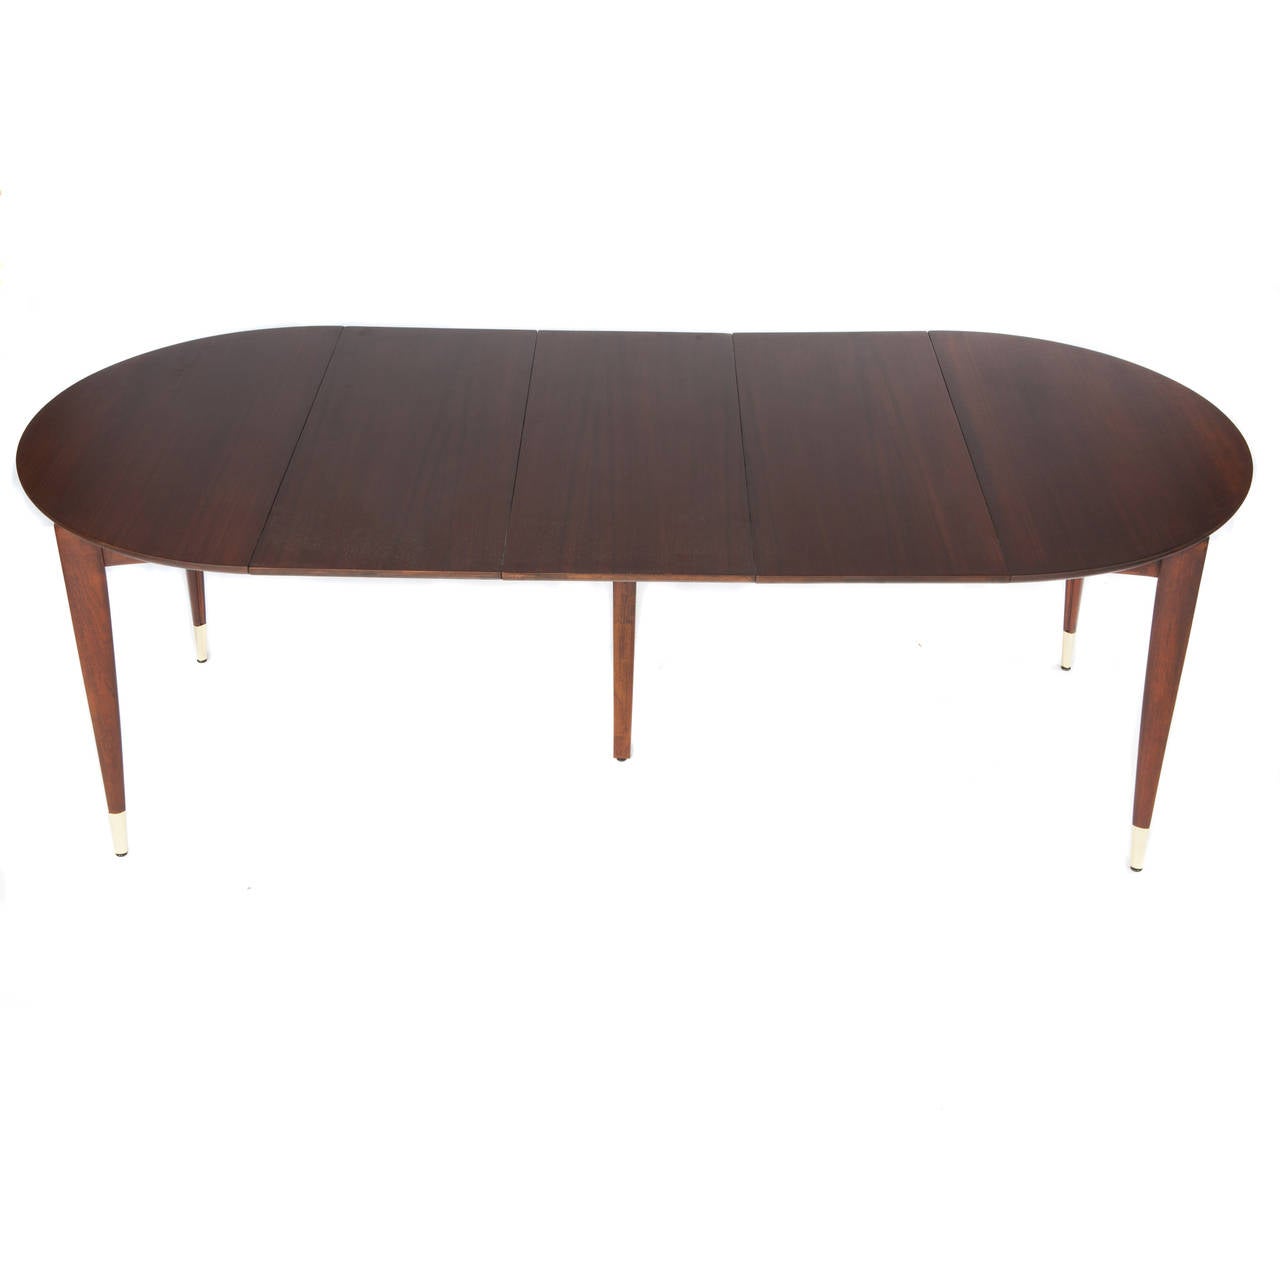 Round, expandable dining table in rich brown Italian walnut supported by tapered legs with brass-capped feet. The table is 40